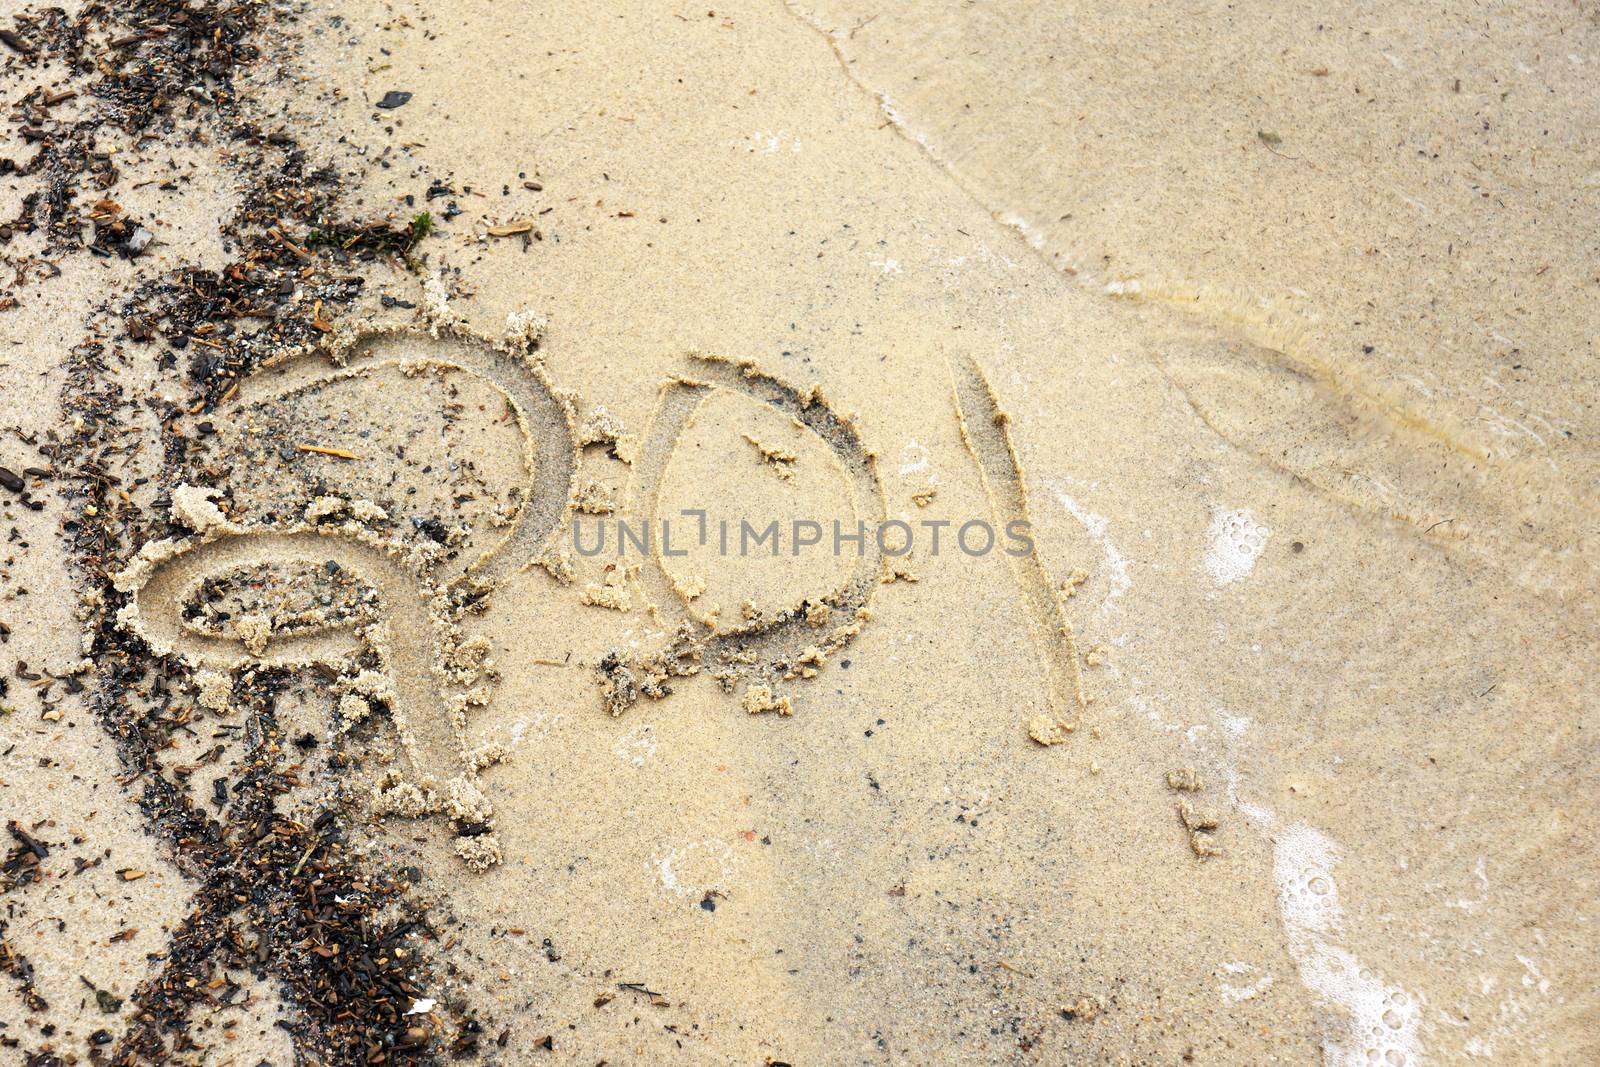 New year concept: year 2014 (or other number) written on the beach being washed away by a wave